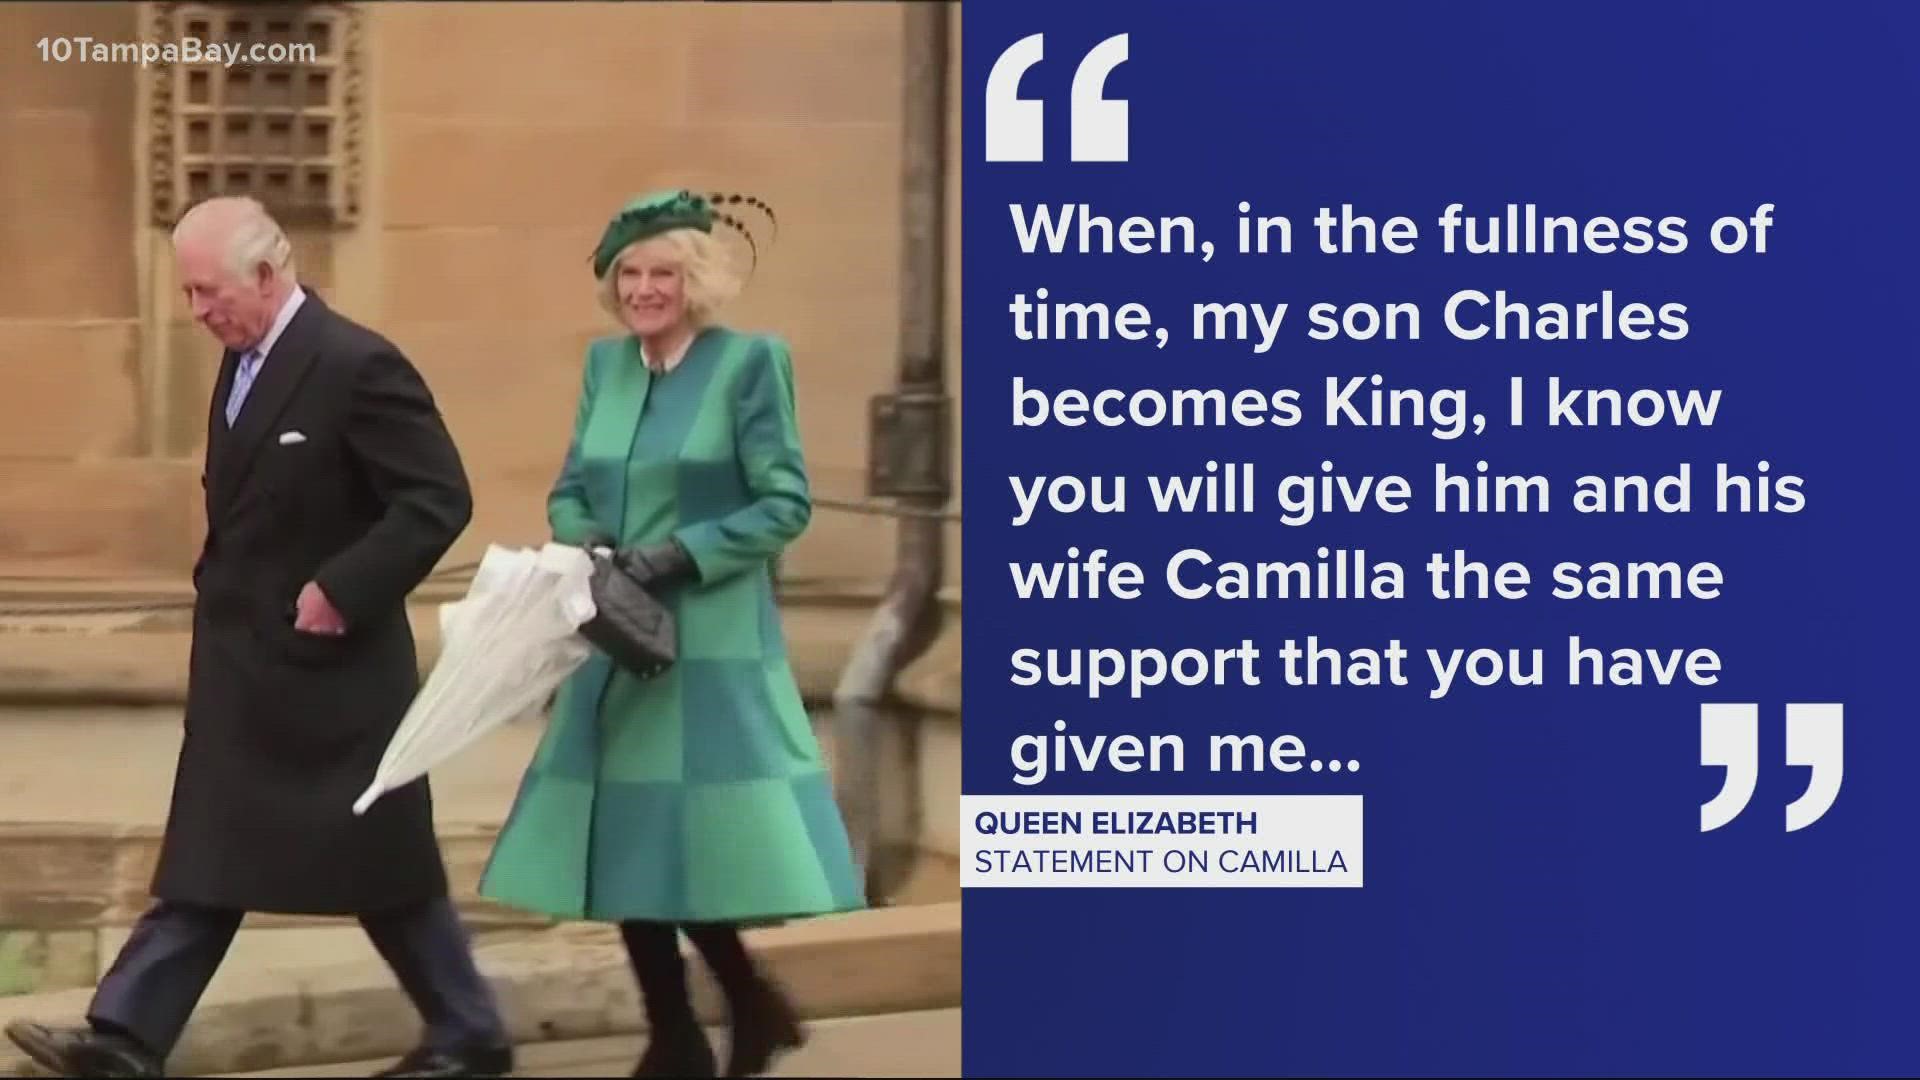 The message ties up a loose end that has hung over the House of Windsor since Charles’ divorce from Princess Diana.